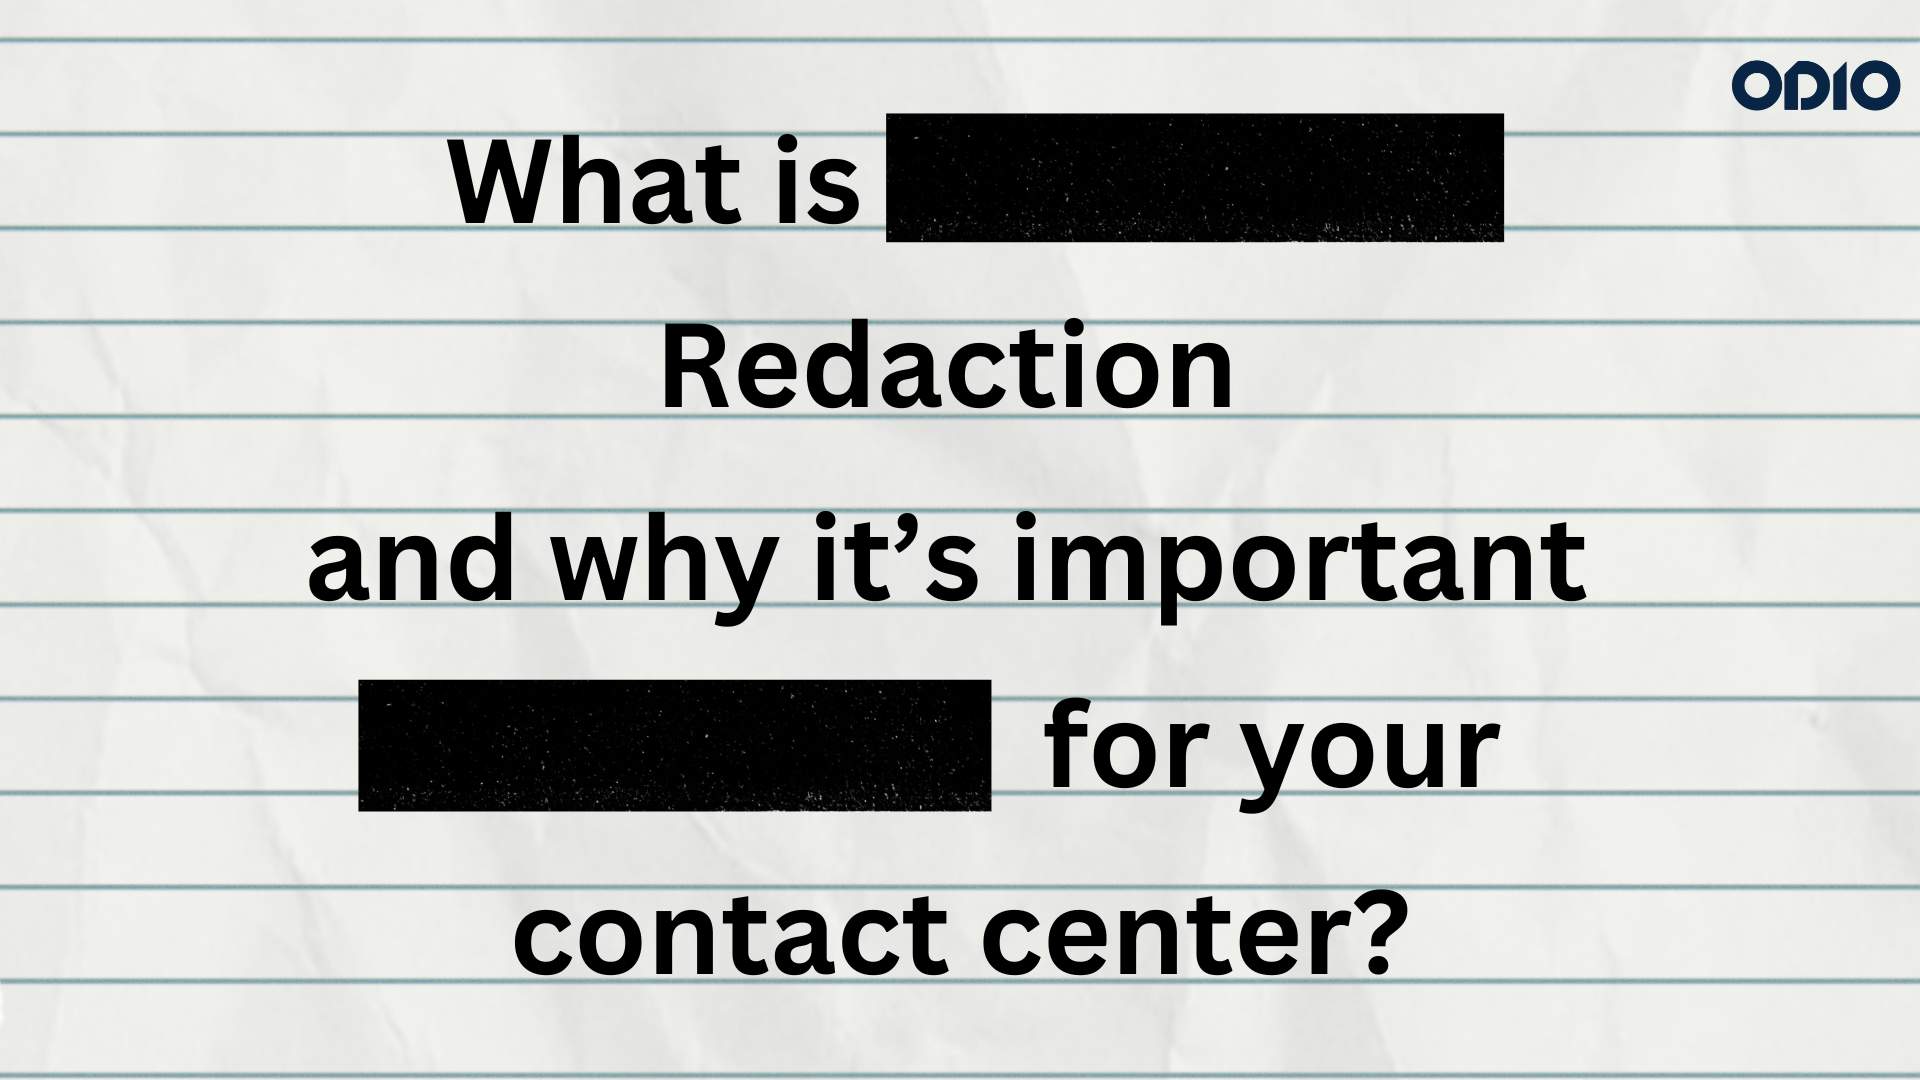 Image asking the questions that is what is Redaction and why it's important for your contact center?